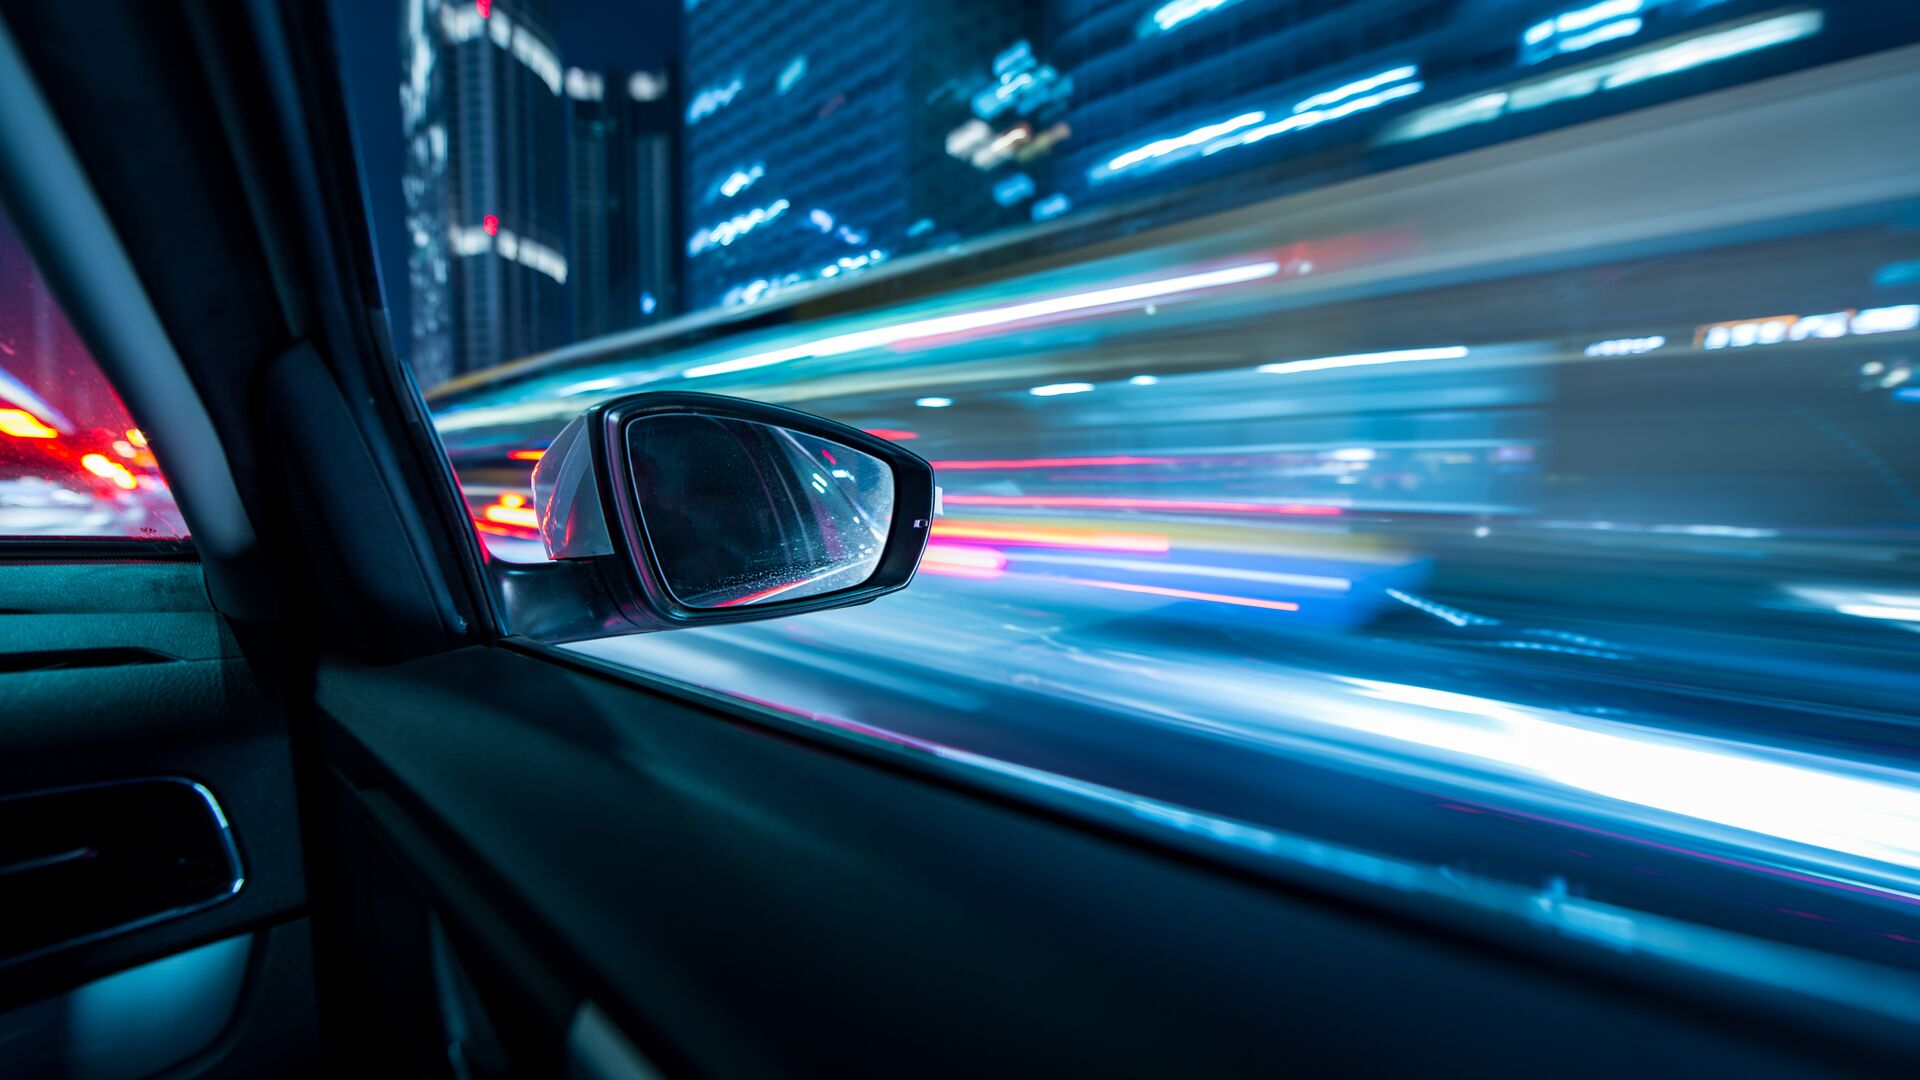 Representing the future of mobility is an image of a city scape flying by in patterns of lights outside of a car window.